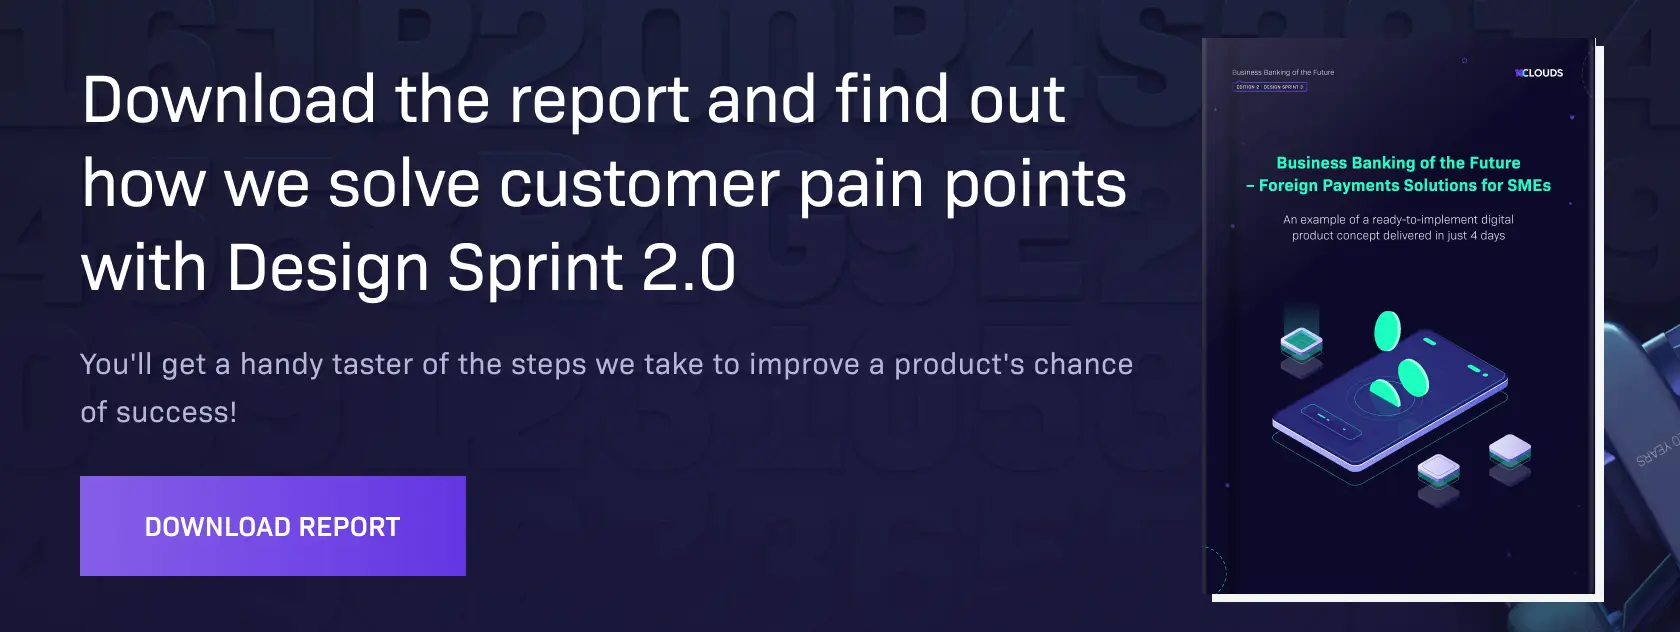 banner with download infographic - report how to solve customer pain points